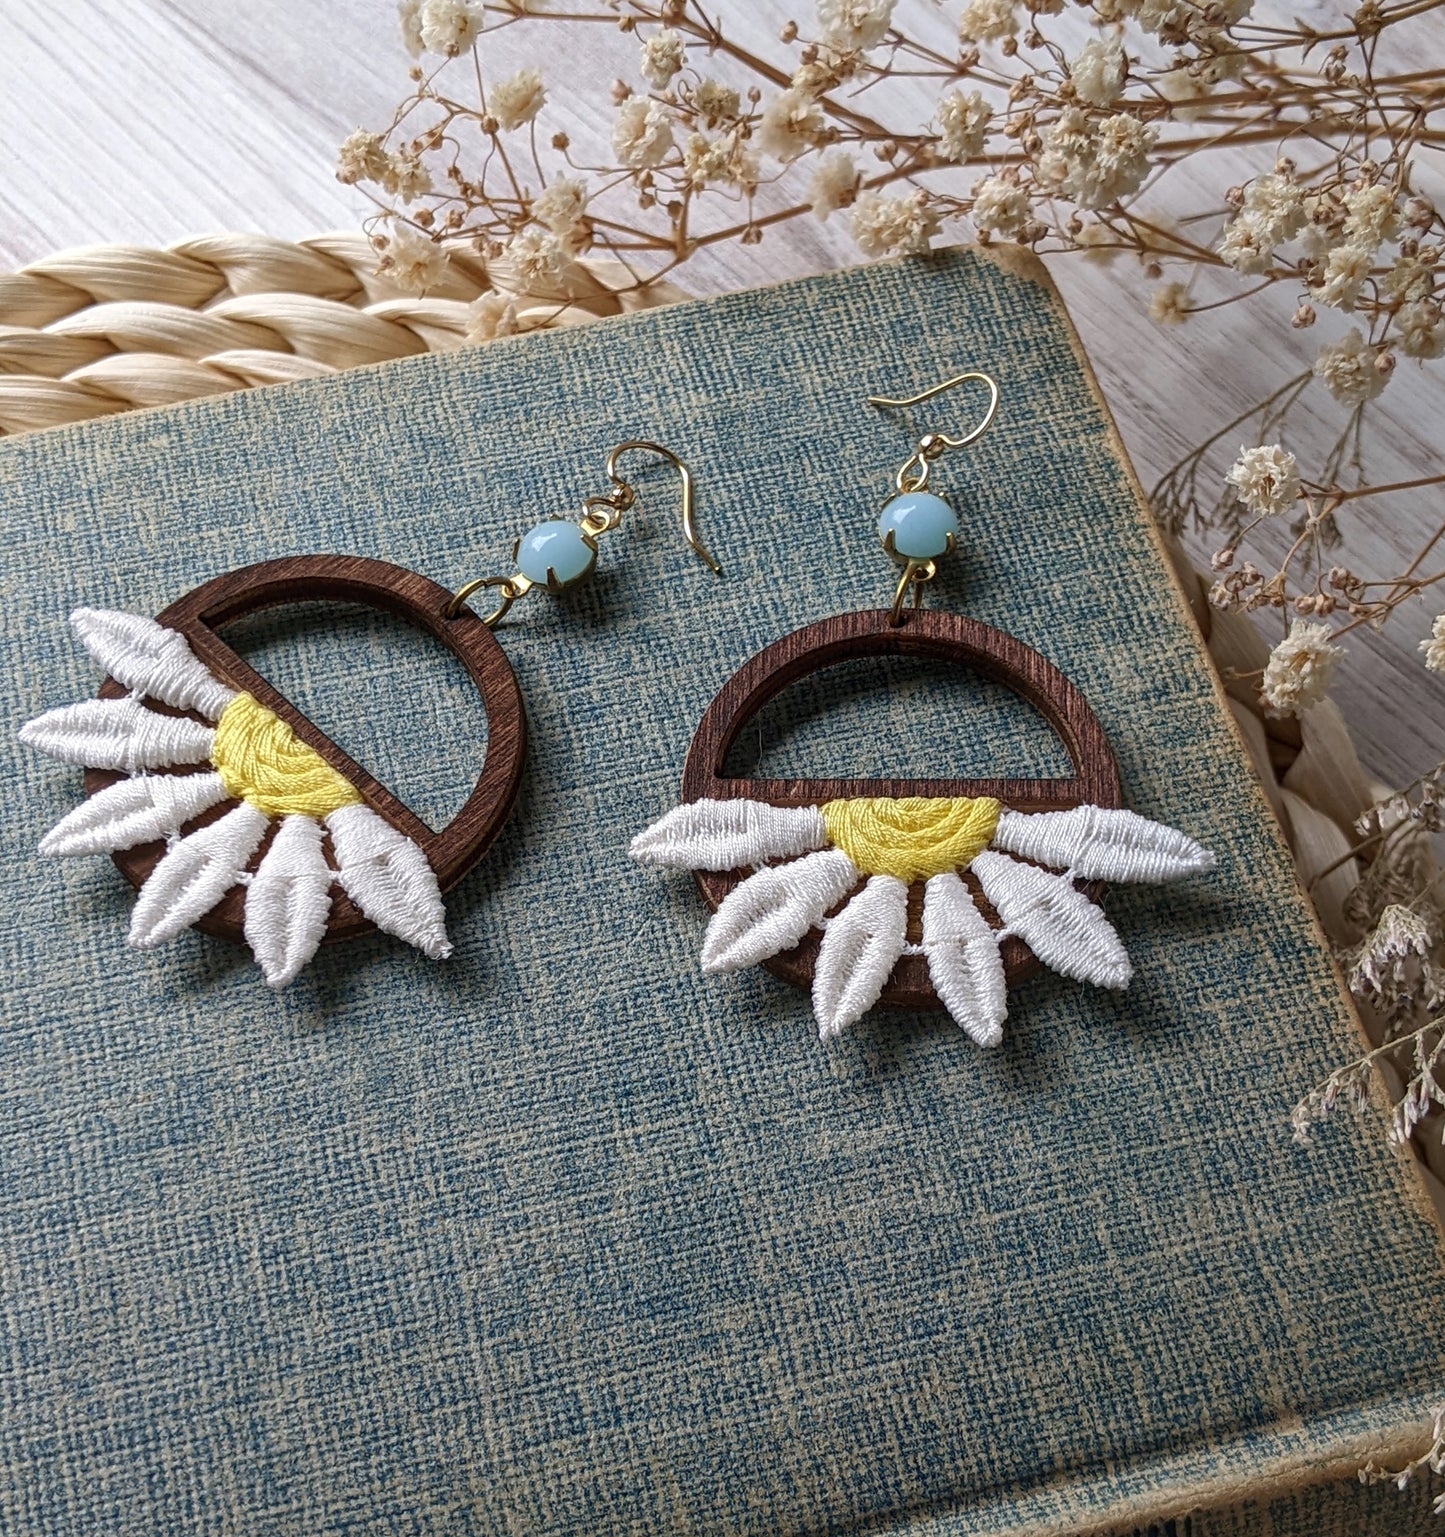 Retro Daisy Earrings With Vintage 90s Fabric Flowers And 1960s Blue Glass